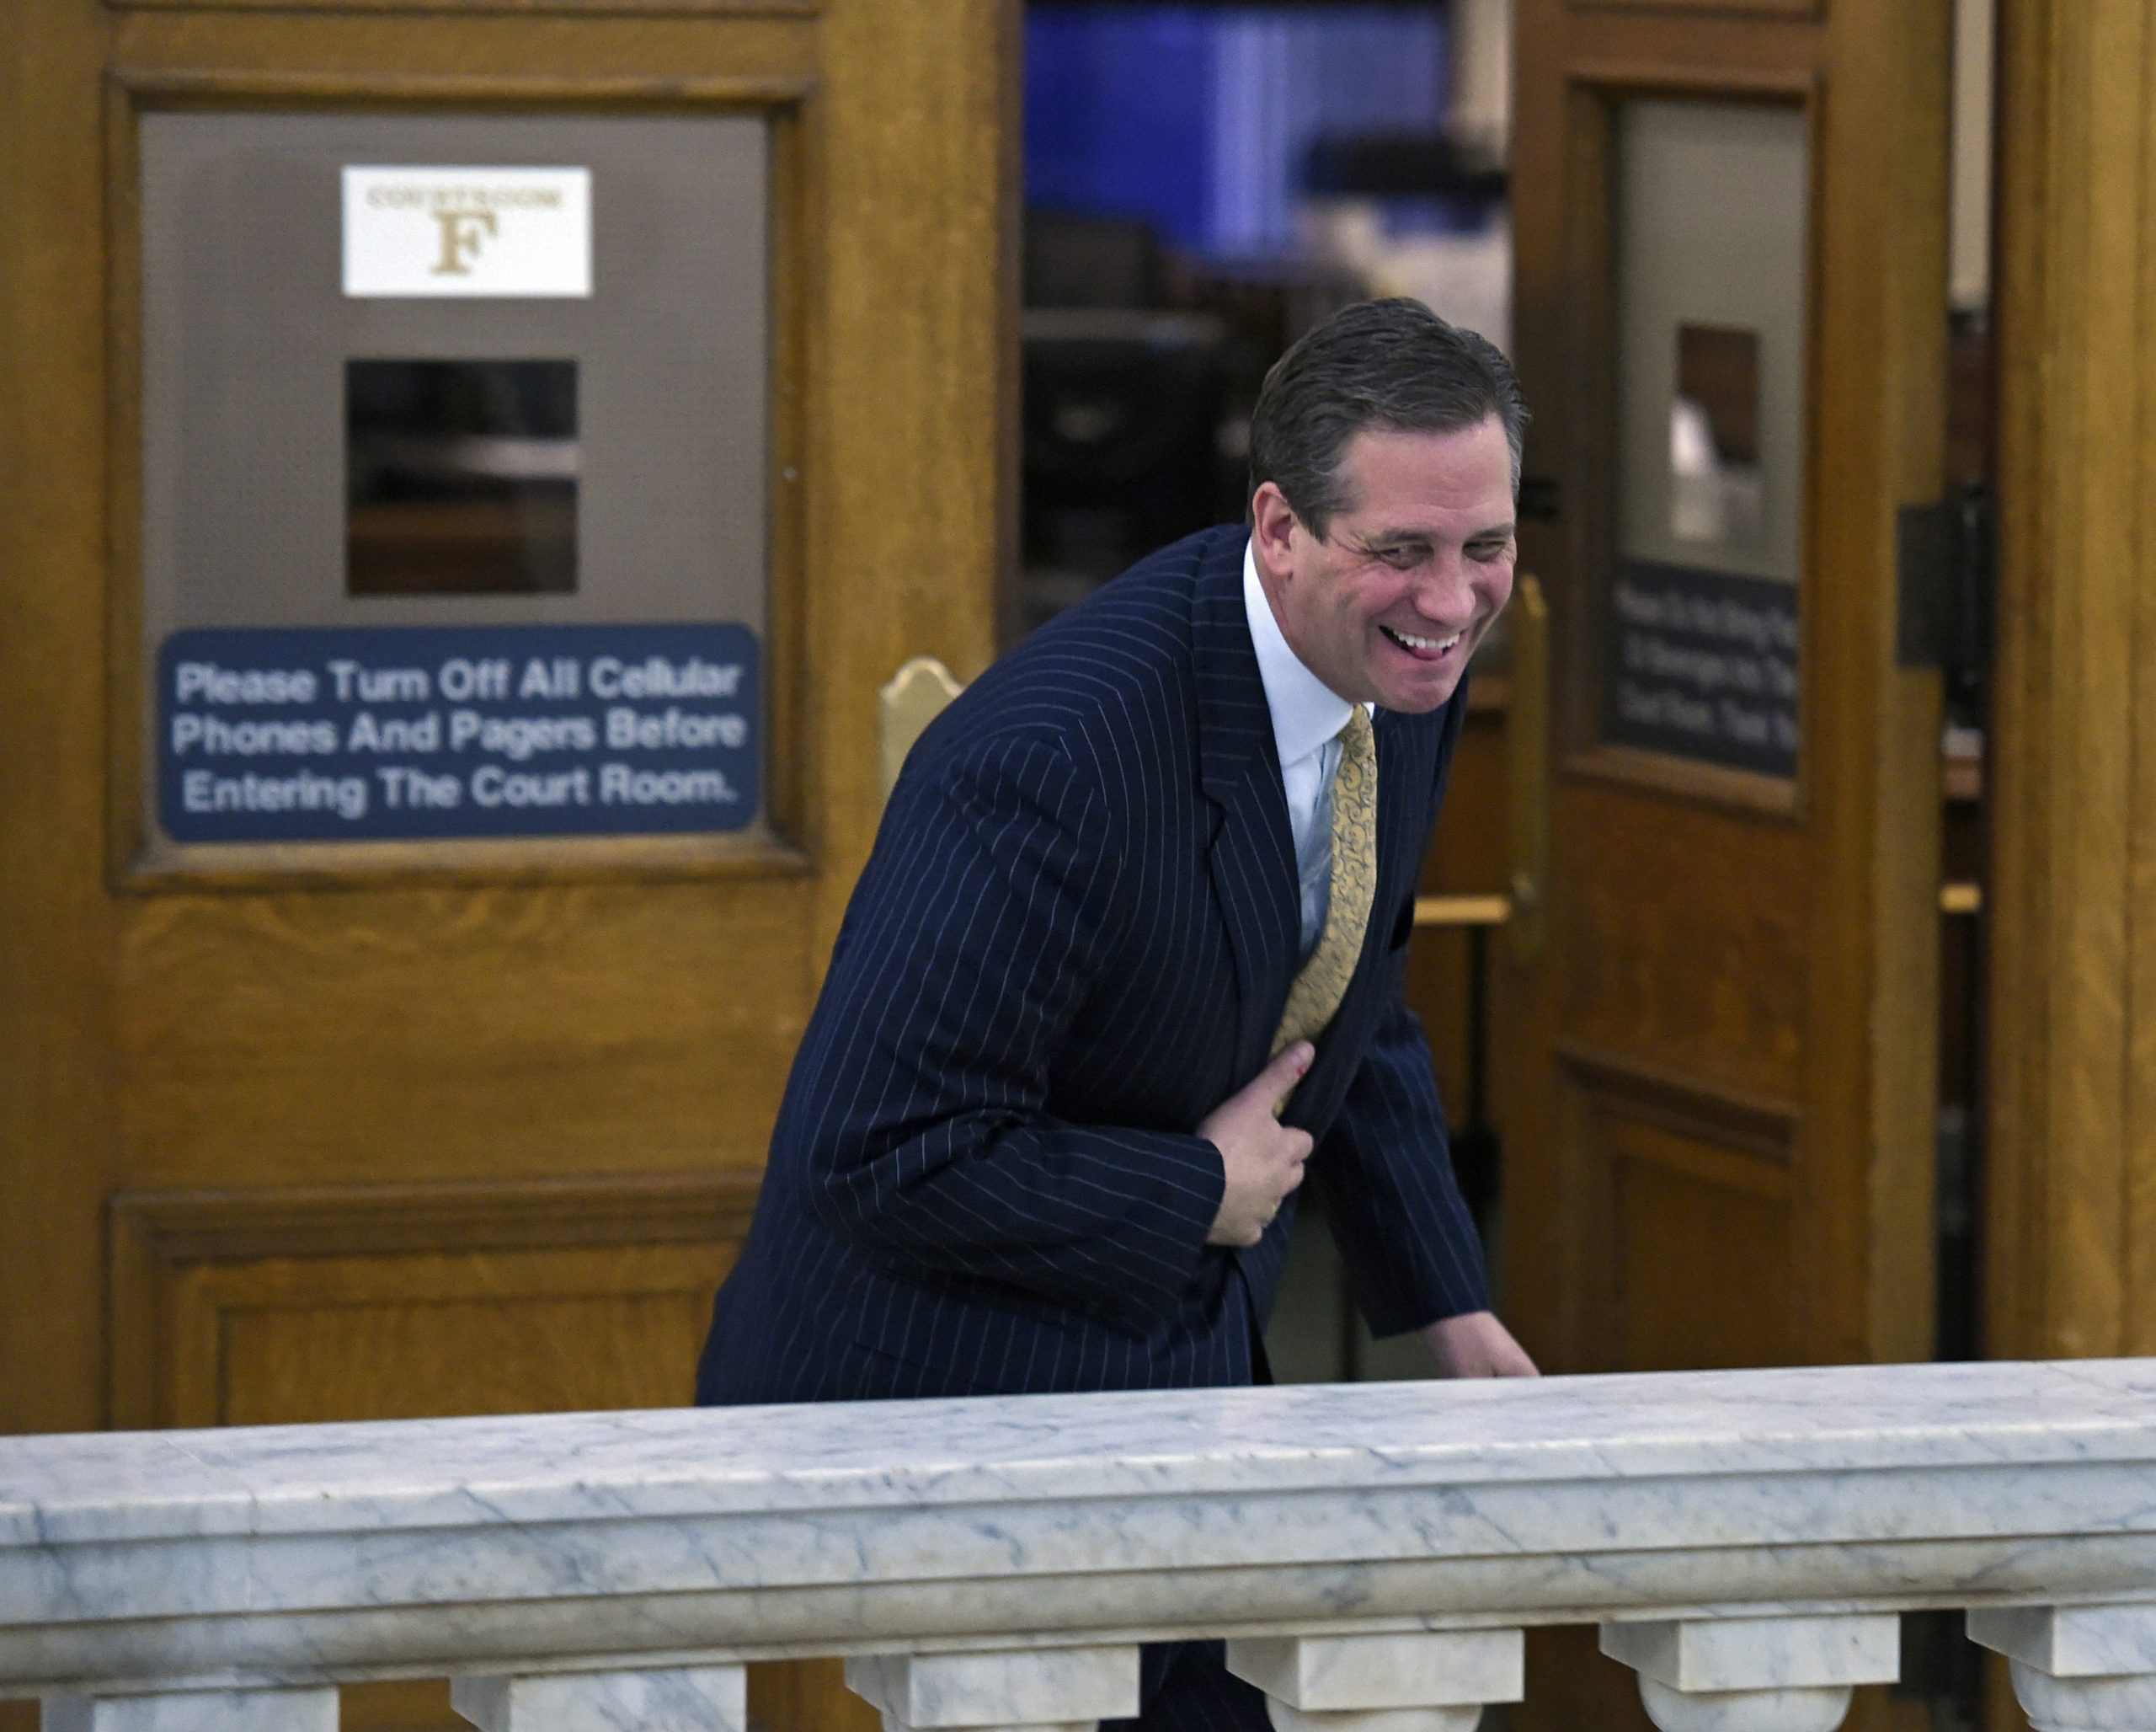 Former Montgomery County District Attorney Bruce Castor leaves Montgomery County Courtroom A after testifying in a pre-trail hearing for entertainer Bill Cosby and his sexual assault case February 2, 2016 in Norristown, Pennsylvania. Castor is a witness for Cosby, claiming he gave Cosby immunity from prosecution so he, Cosby, would testify in a civil case against him. (Photo by Clem Murray - Pool/Getty Images)